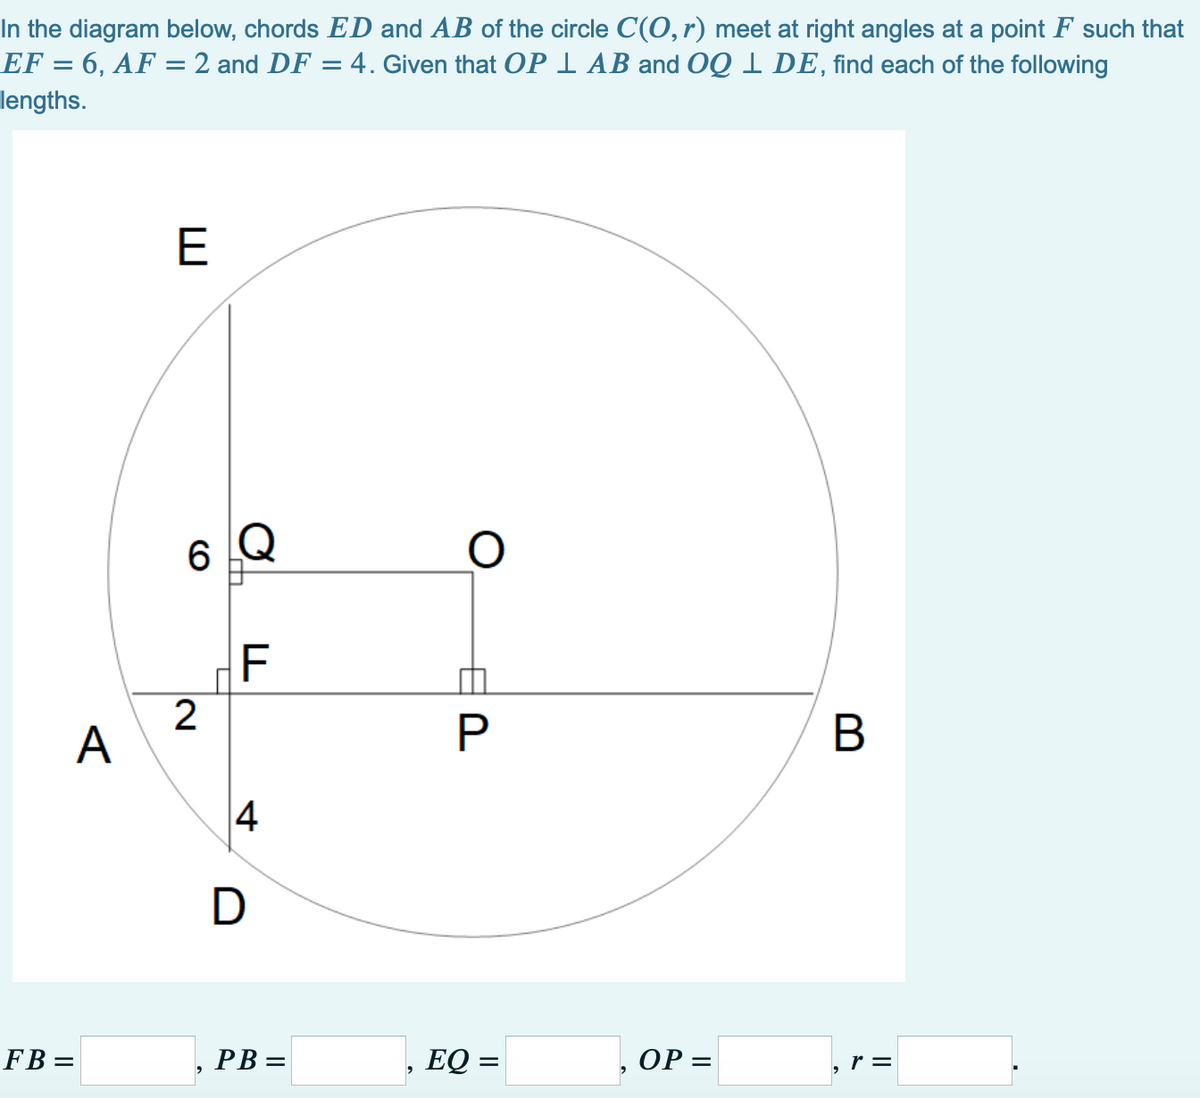 In the diagram below, chords ED and AB of the circle C(O, r) meet at right angles at a point F such that
EF = 6, AF = 2 and DF = 4. Given that OP I AB and OQ 1 DE, find each of the following
lengths.
E
6
2
А
4
D
FB =
, PB =
EQ =
ОР —
, r =
B
日P
